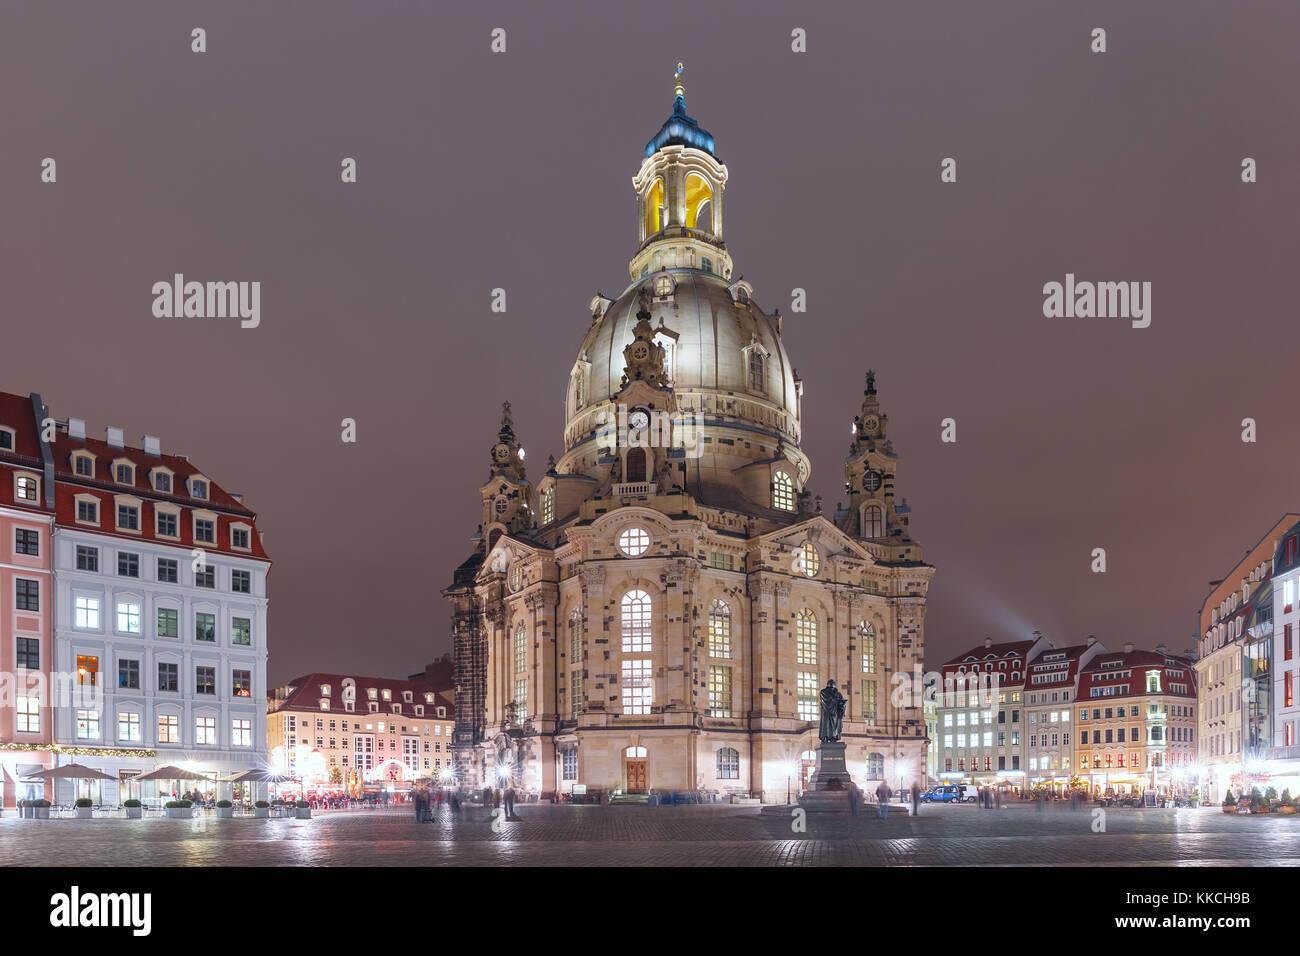 Frauenkirche at night in Dresden, Germany Stock Photo